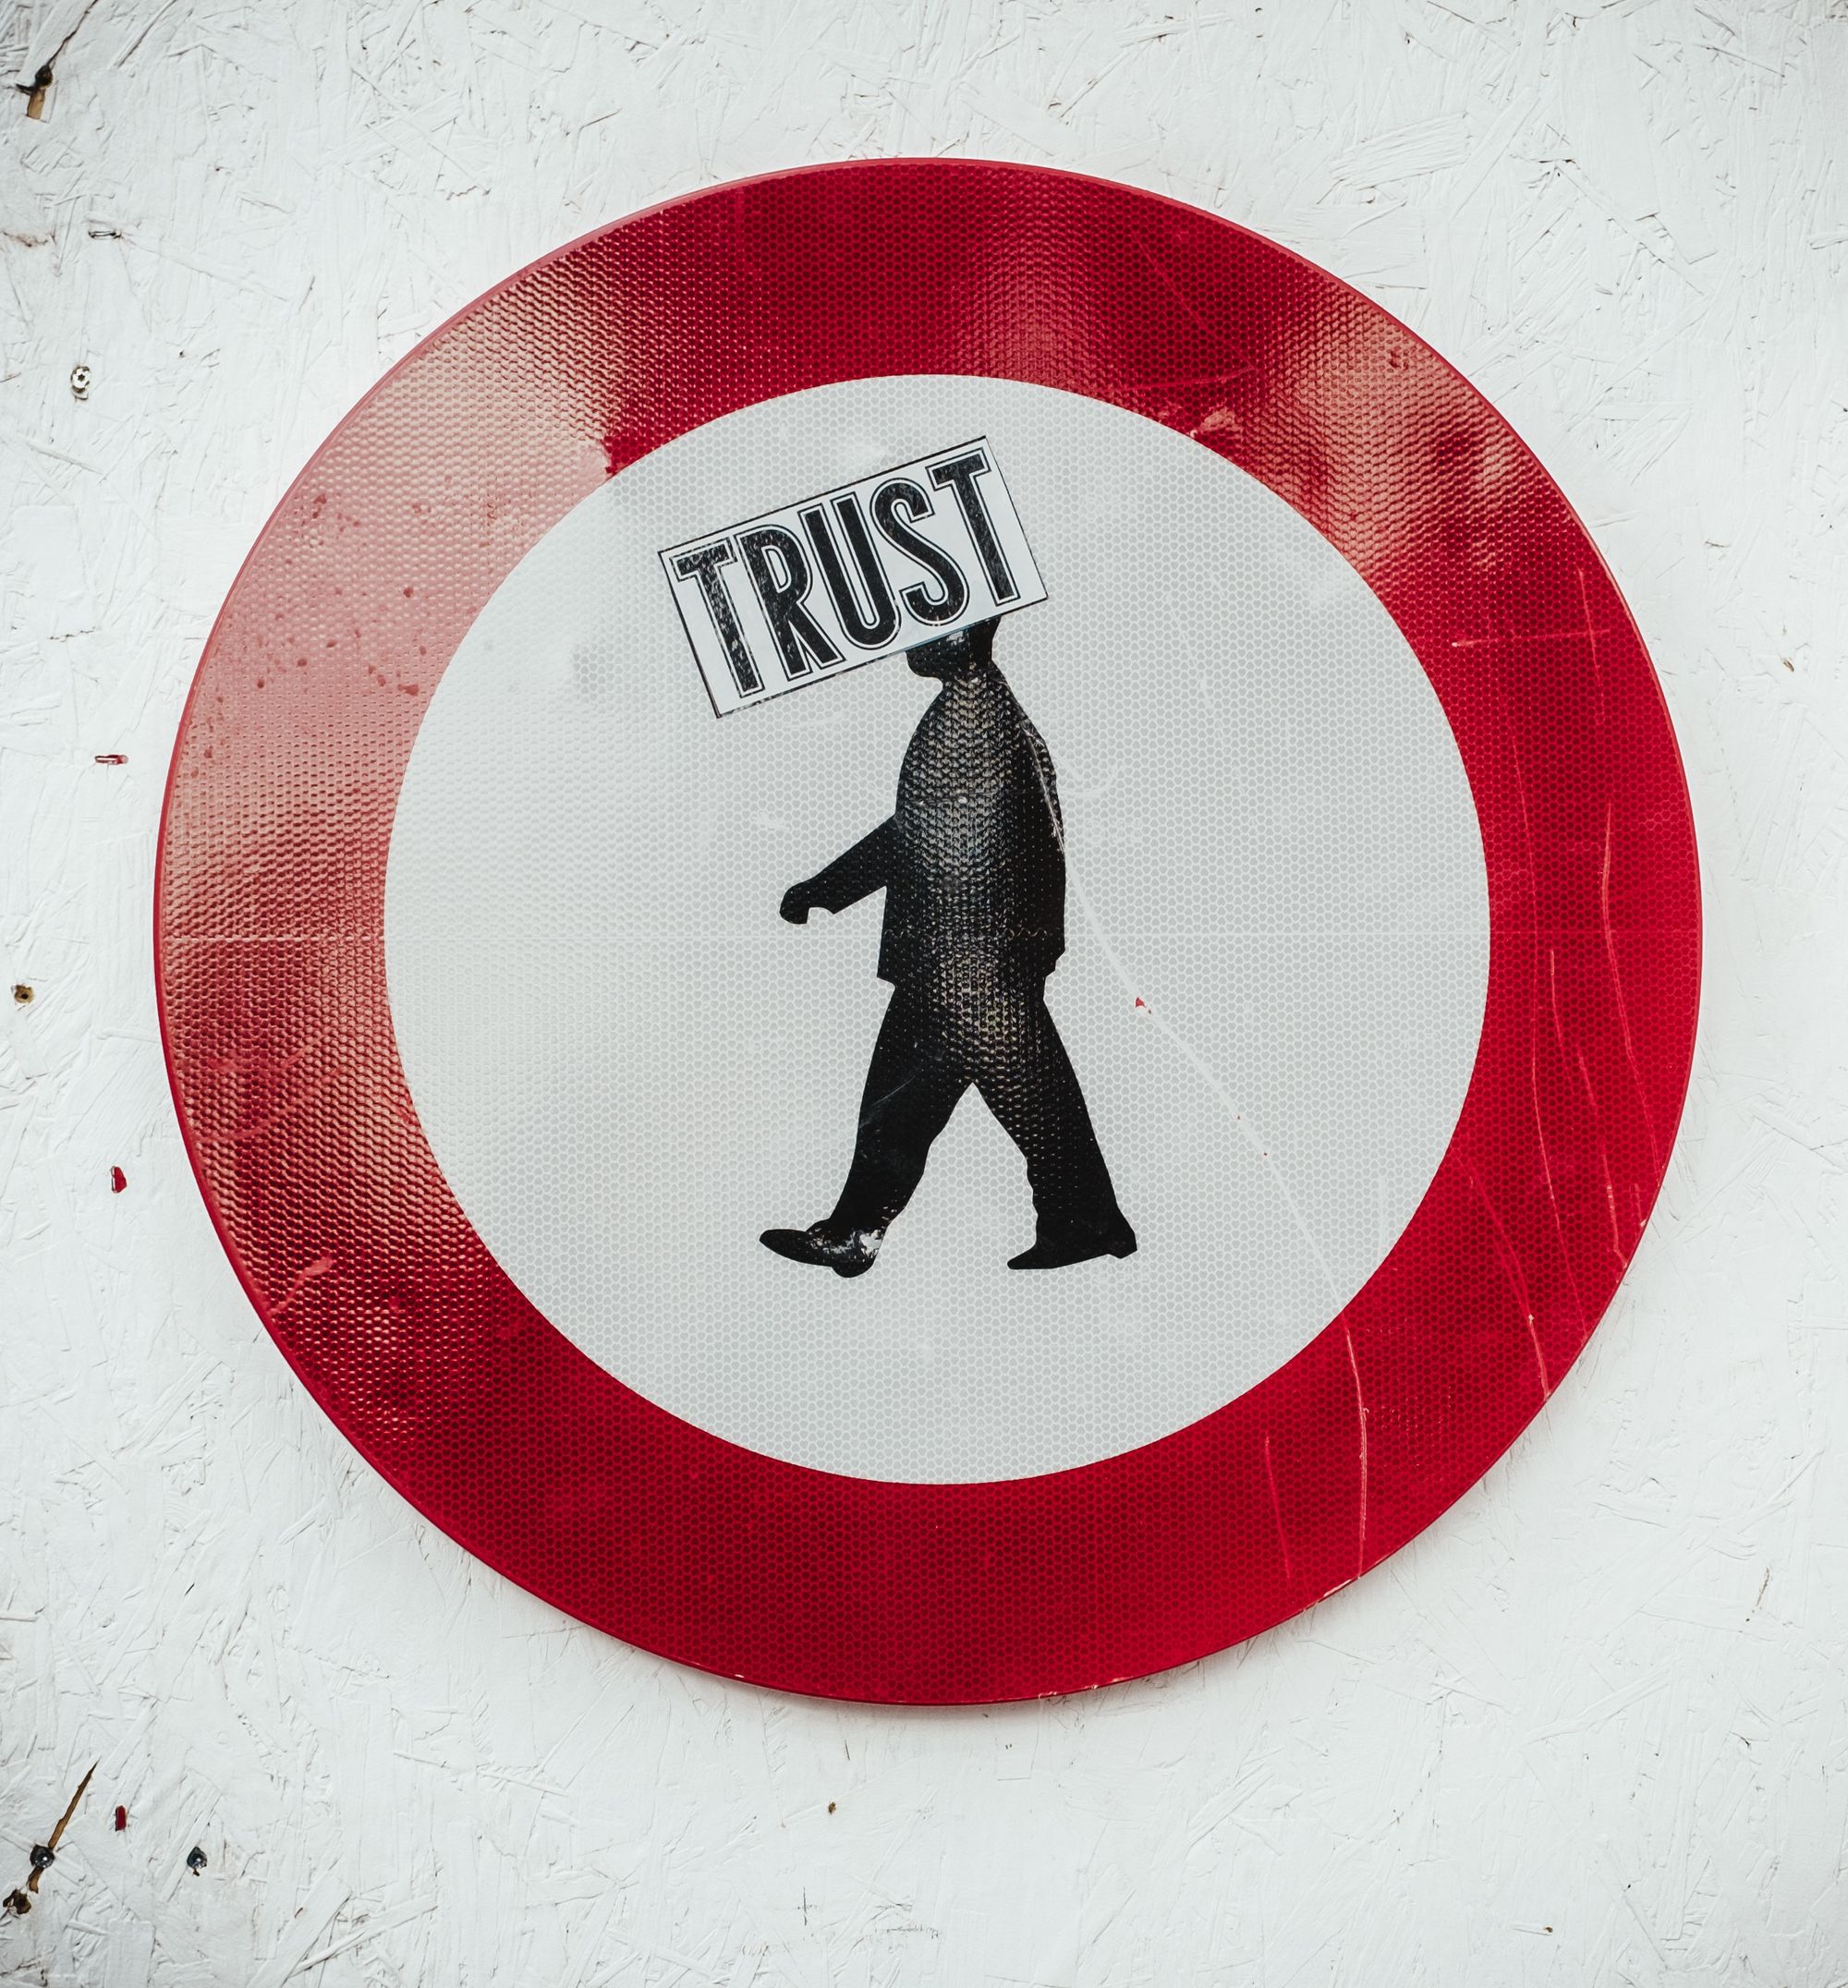 Want your team to trust you?